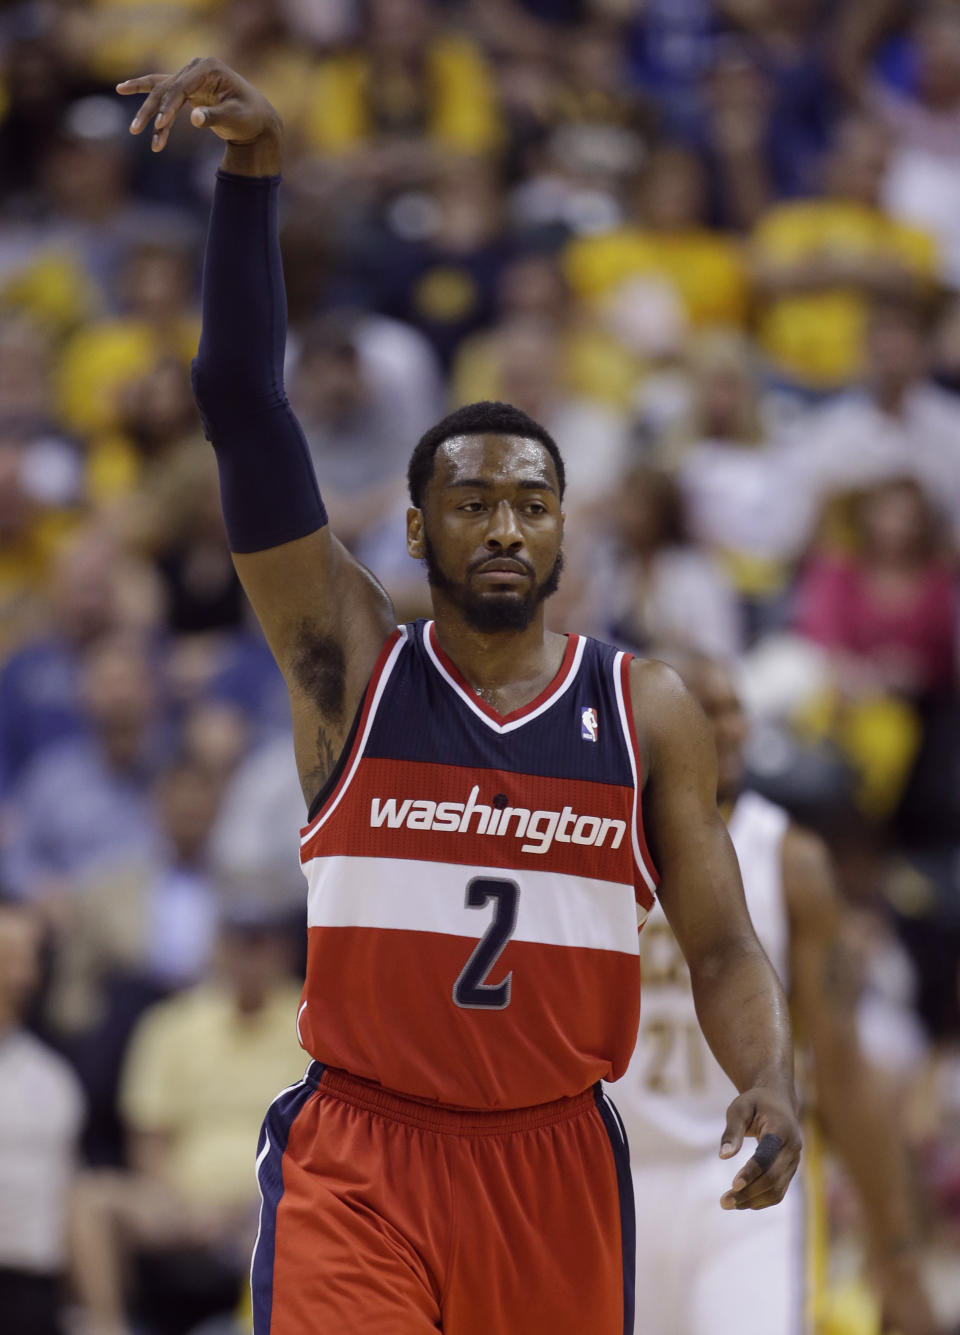 Washington Wizards guard John Wall signals after hitting a three-point basket against the Indiana Pacers during the second half of game 5 of the Eastern Conference semifinal NBA basketball playoff series Tuesday, May 13, 2014, in Indianapolis. (AP Photo/Darron Cummings)